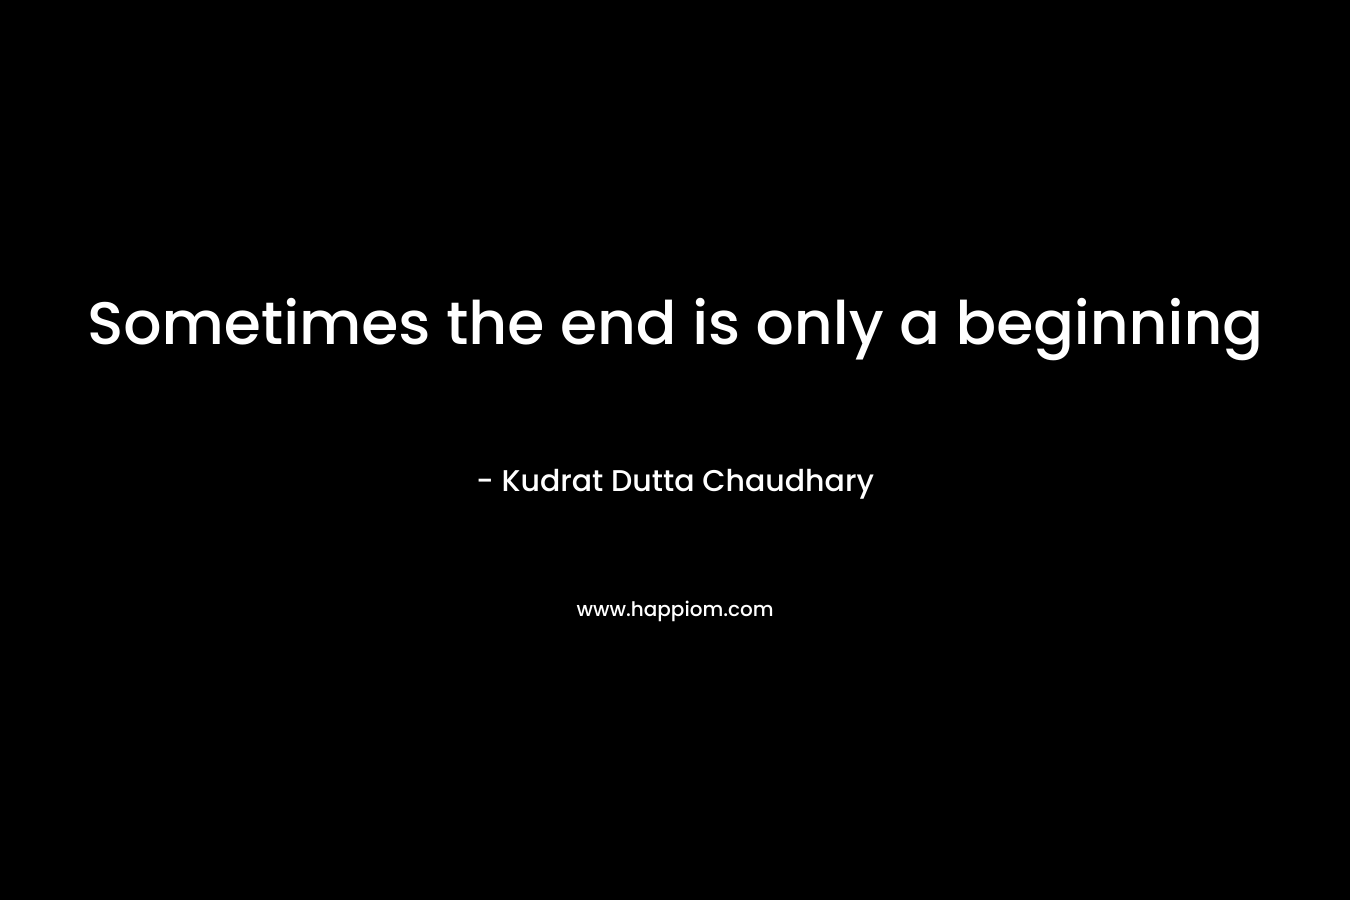 Sometimes the end is only a beginning – Kudrat Dutta Chaudhary